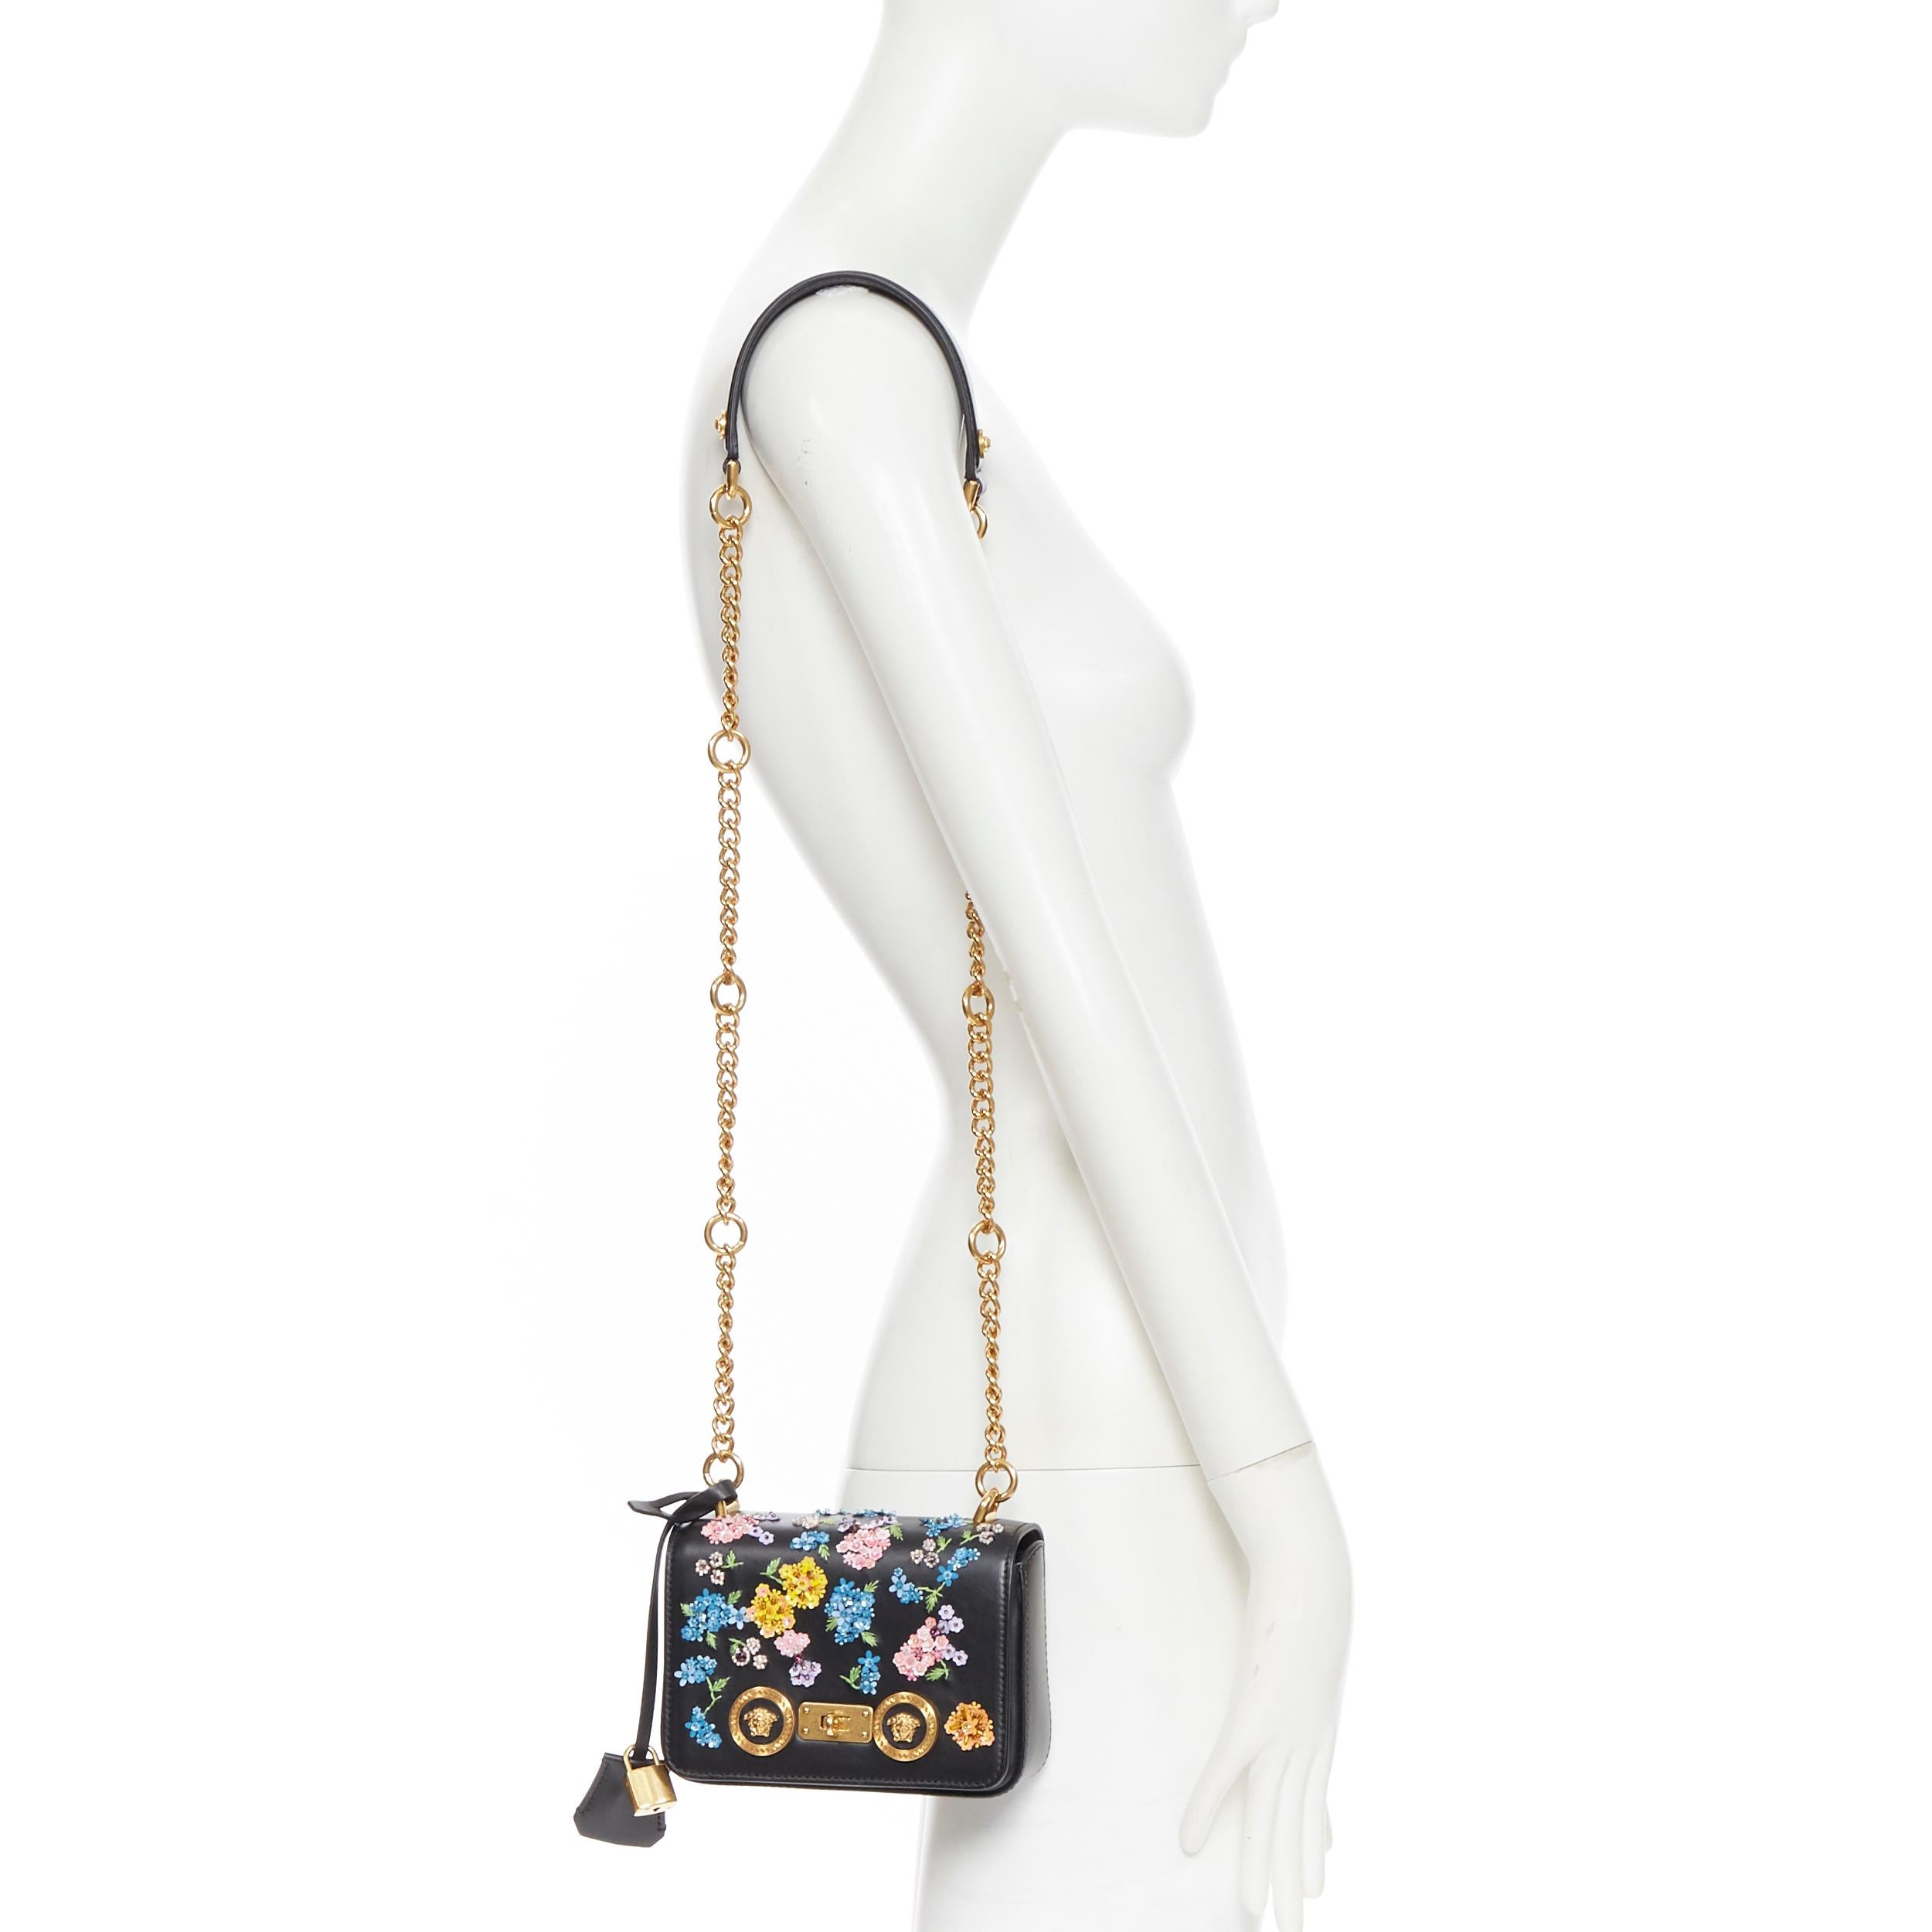 new VERSACE Runway Mini Icon black floral embellished Medusa small shoulder bag
Brand: Versace
Designer: Donatella Versace
Collection: 2019
Model Name / Style: Mini Icon
Material: Leather
Color: Black
Pattern: Floral
Closure: Turnlock
Lining